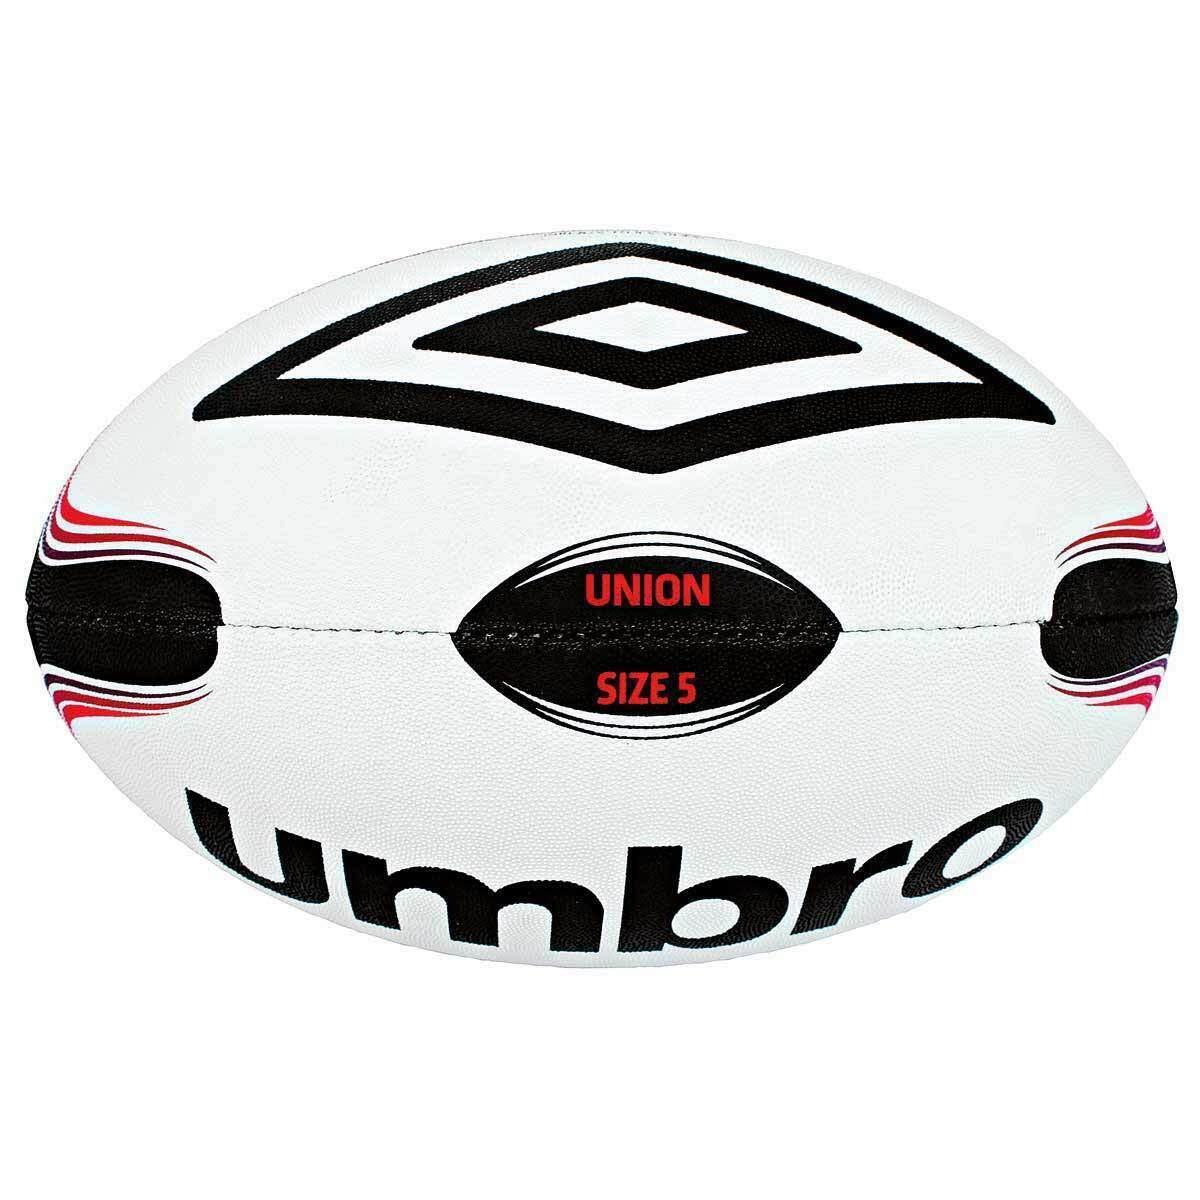 Umbro Training Rugby Ball Size 5 2/6